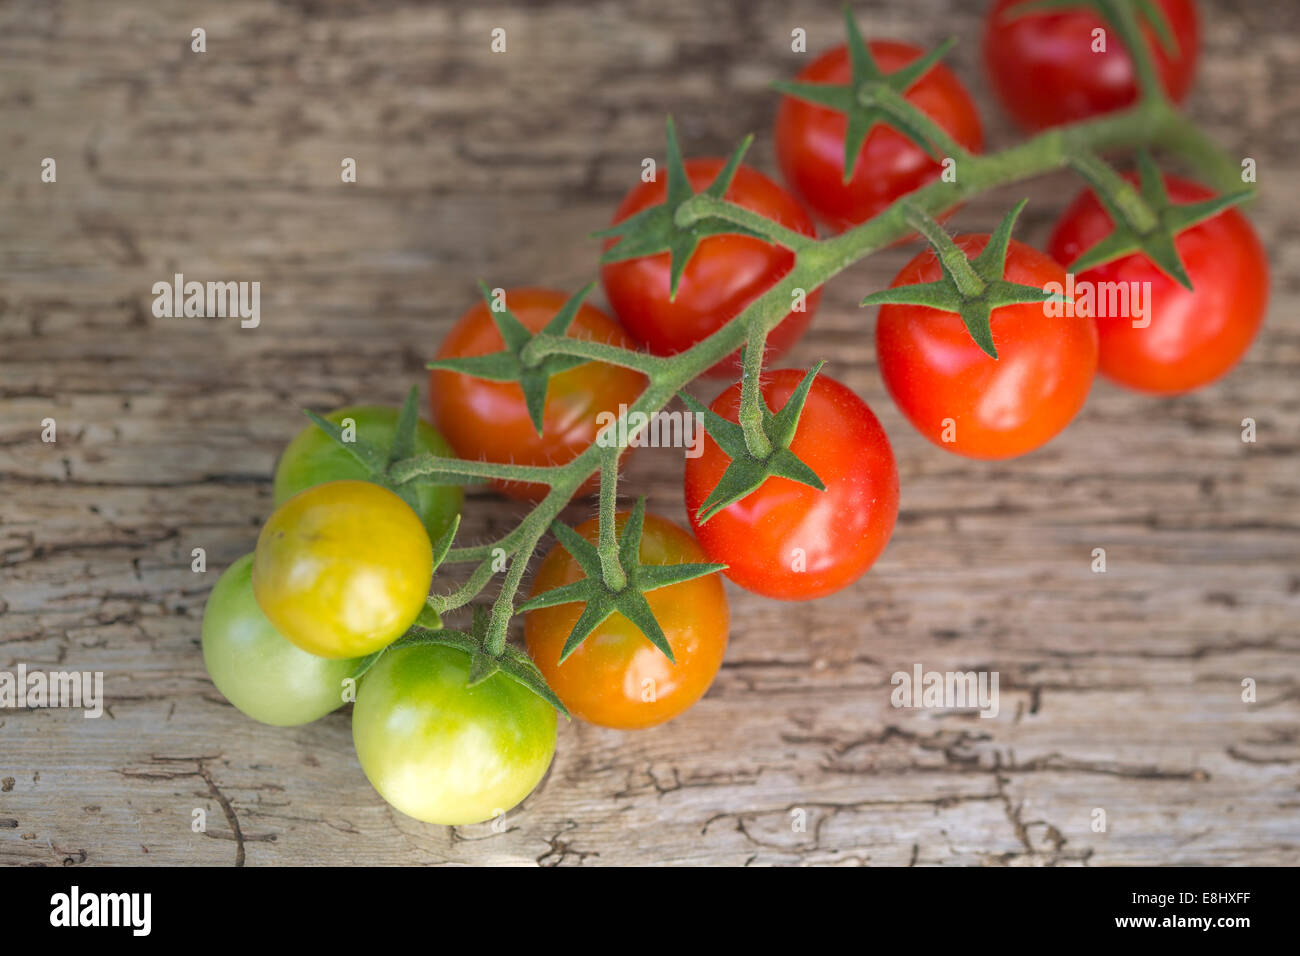 red and green cherry tomatoes on vine against wood from above Stock Photo